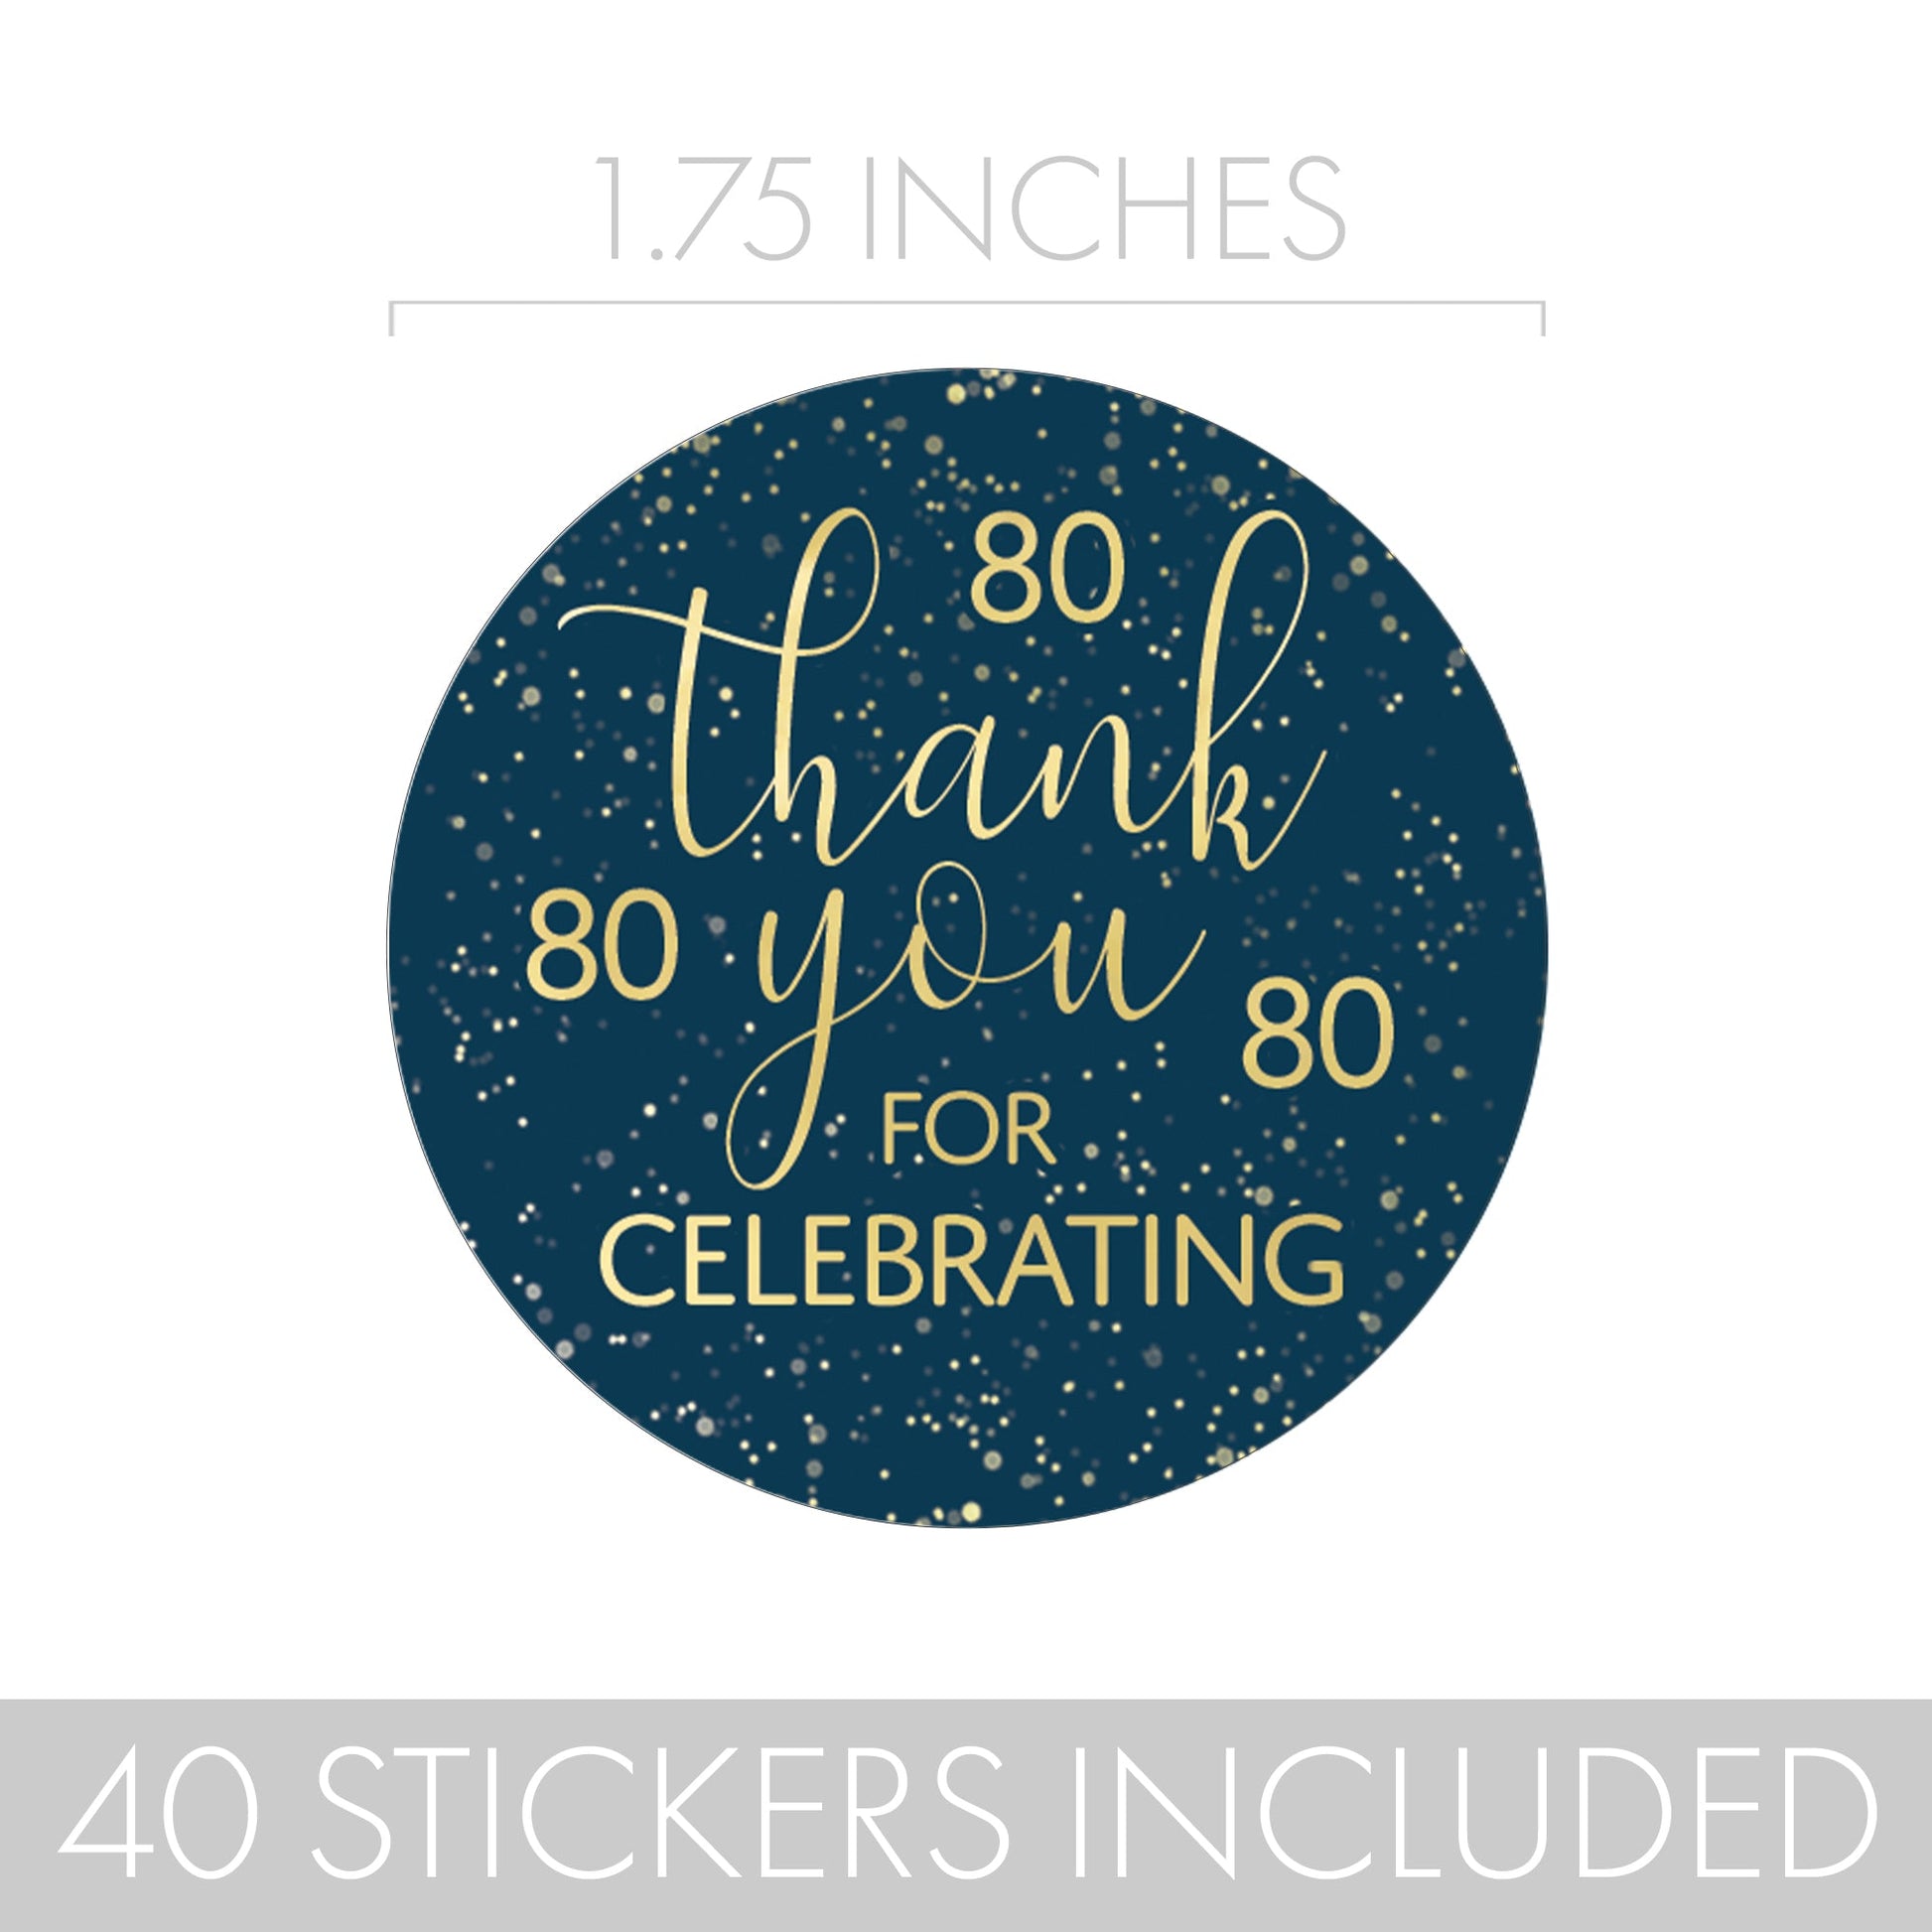 Add a Personal Touch to Your 80th Birthday Thank You Cards with Navy Blue and Gold Stickers